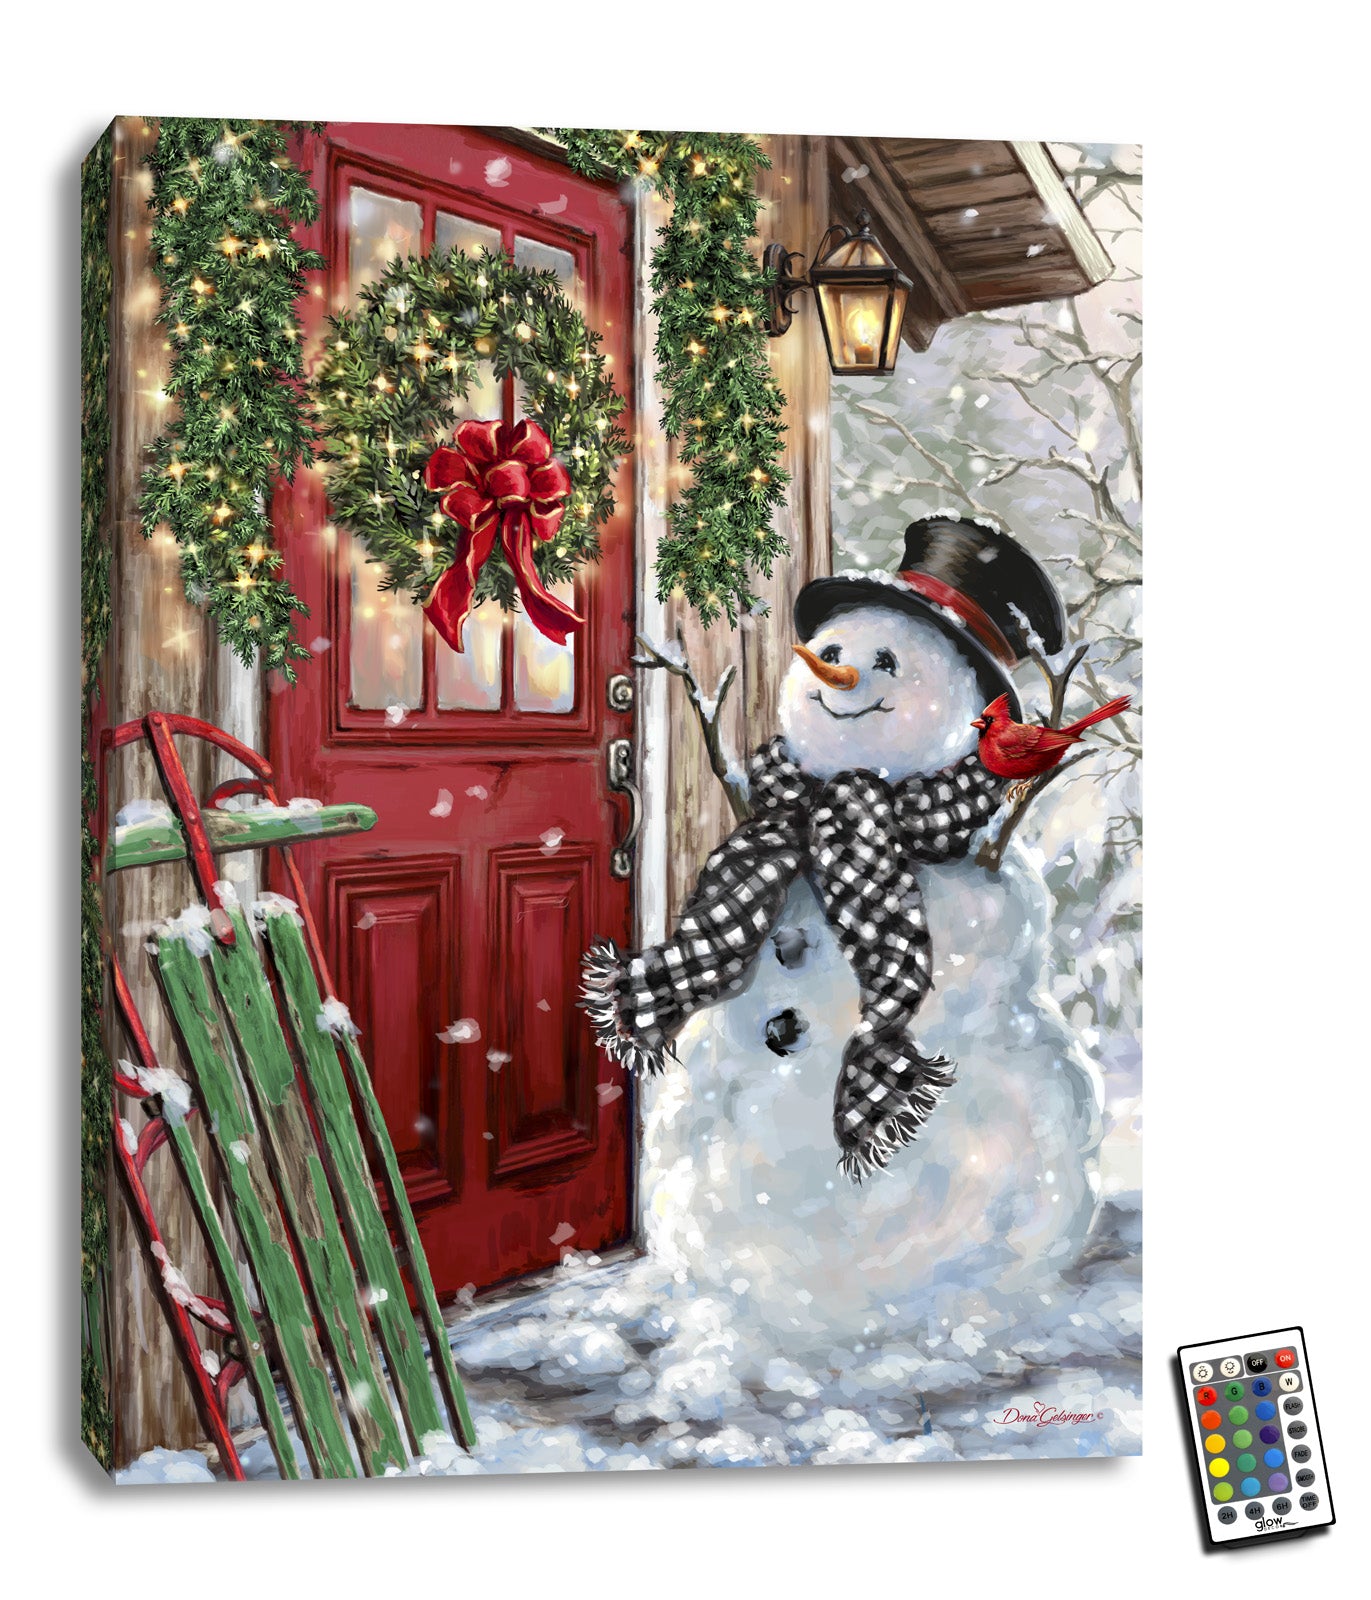 This delightful piece features a jolly snowman, complete with a top hat and scarf, standing proudly beside a classic red door adorned with a beautiful wreath. On the other side of the door, a wooden sled adds a touch of whimsy to this winter wonderland scene.